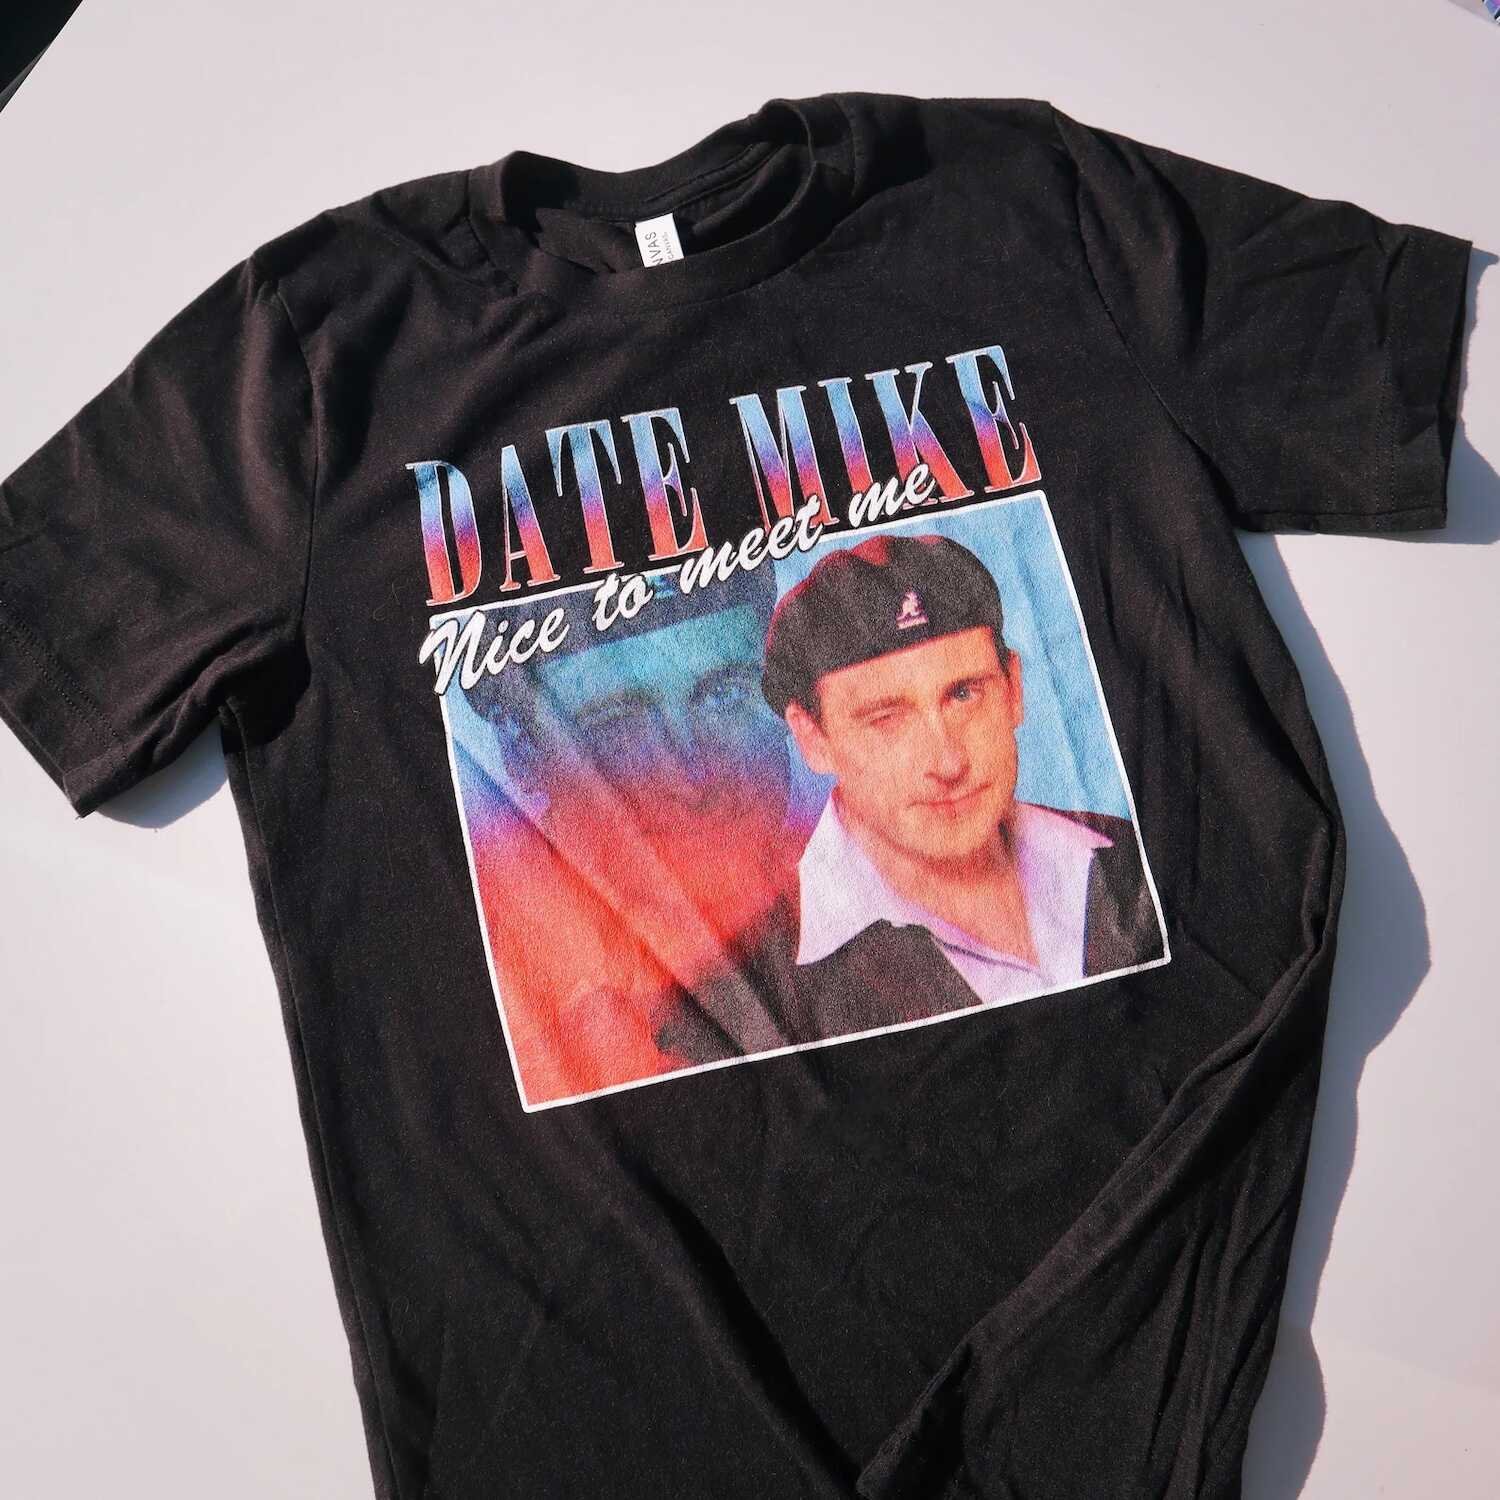 The Office Date Mike T-shirt